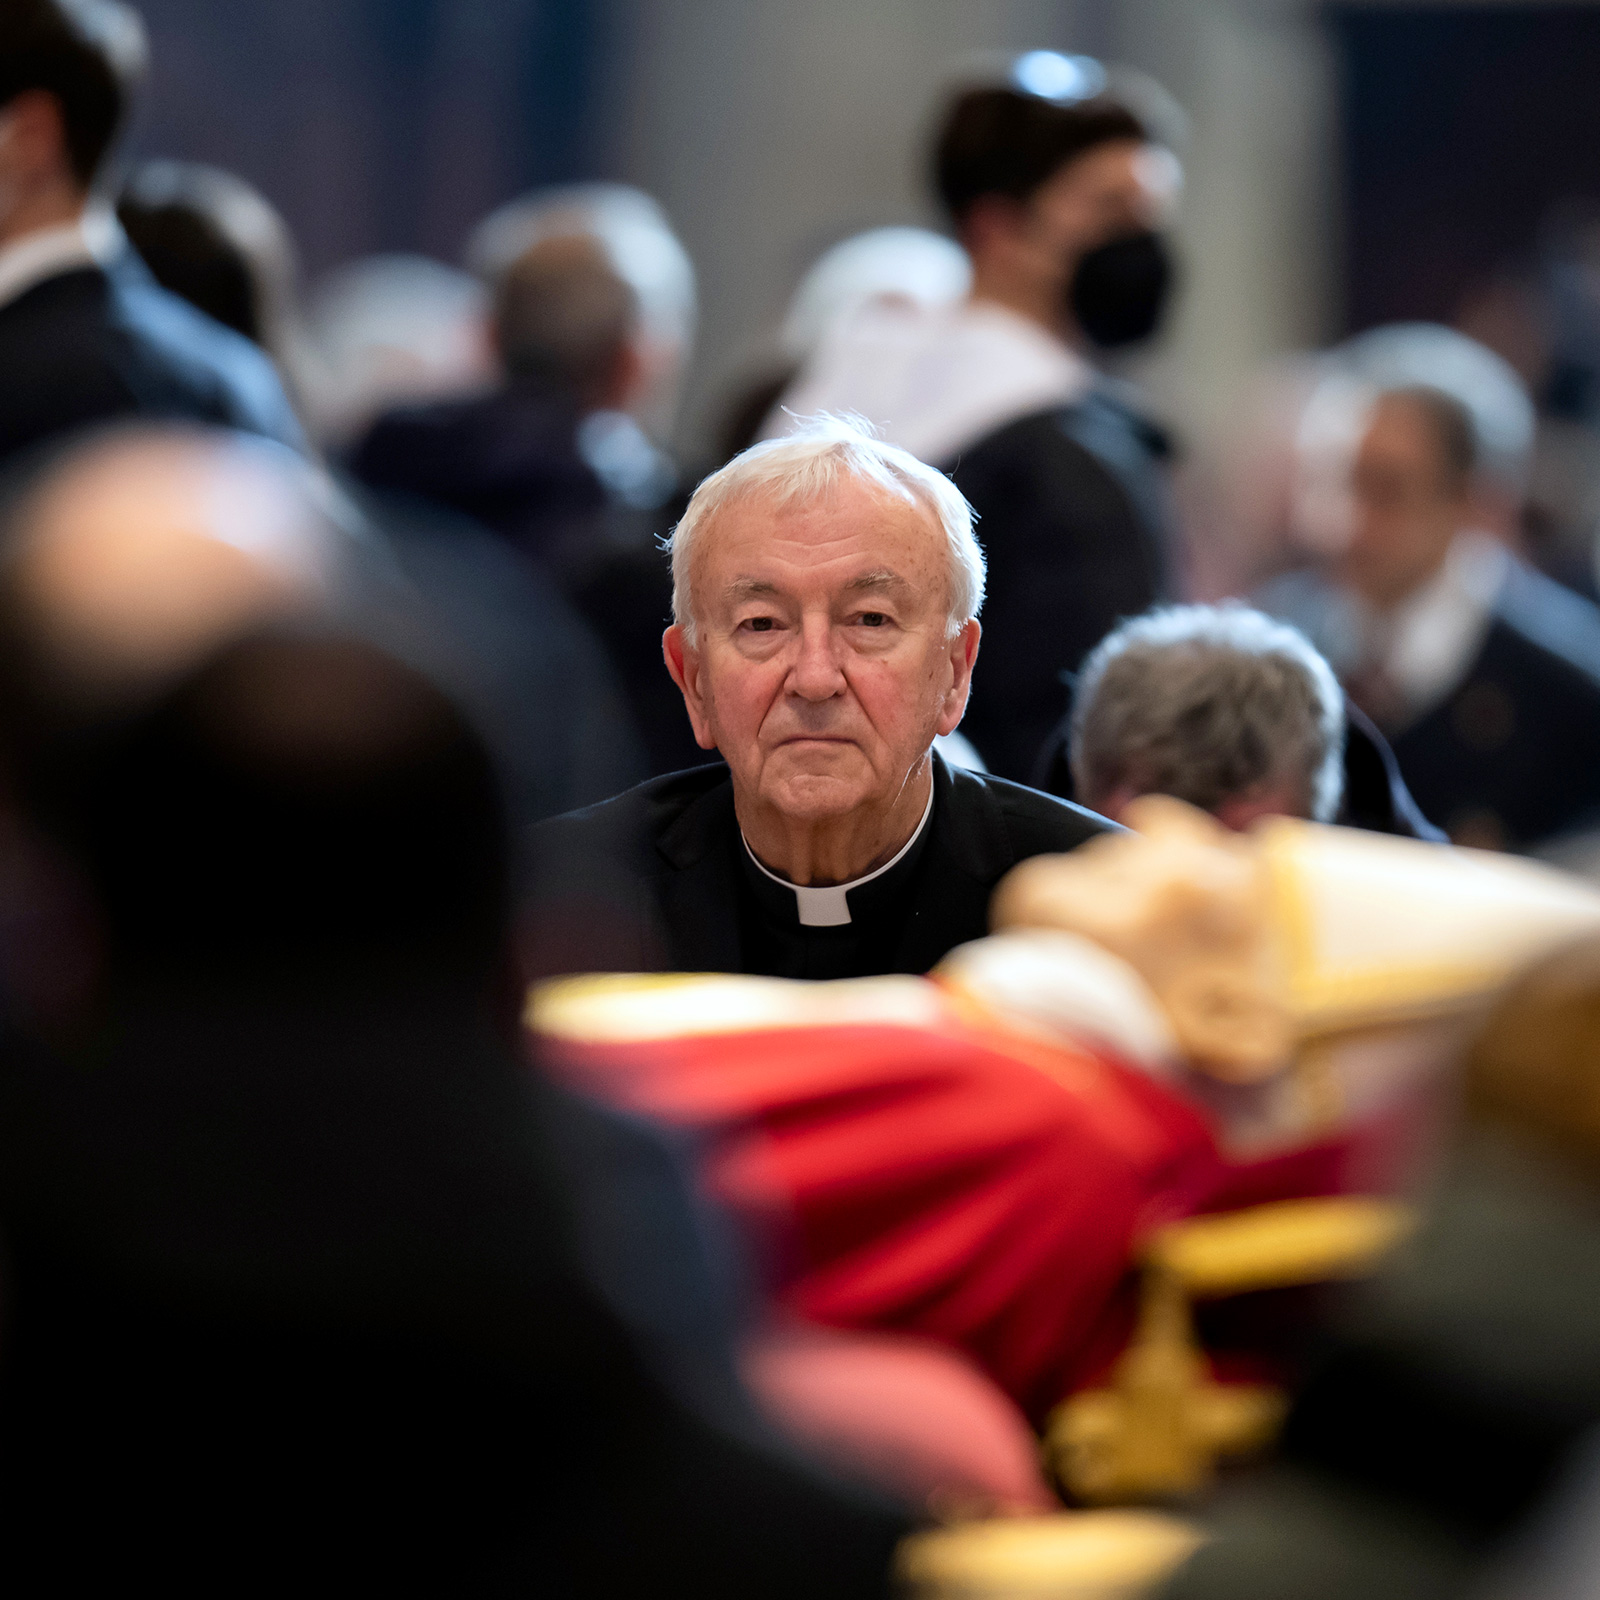 Cardinal's "precious time" praying by Pope Benedict's mortal remains